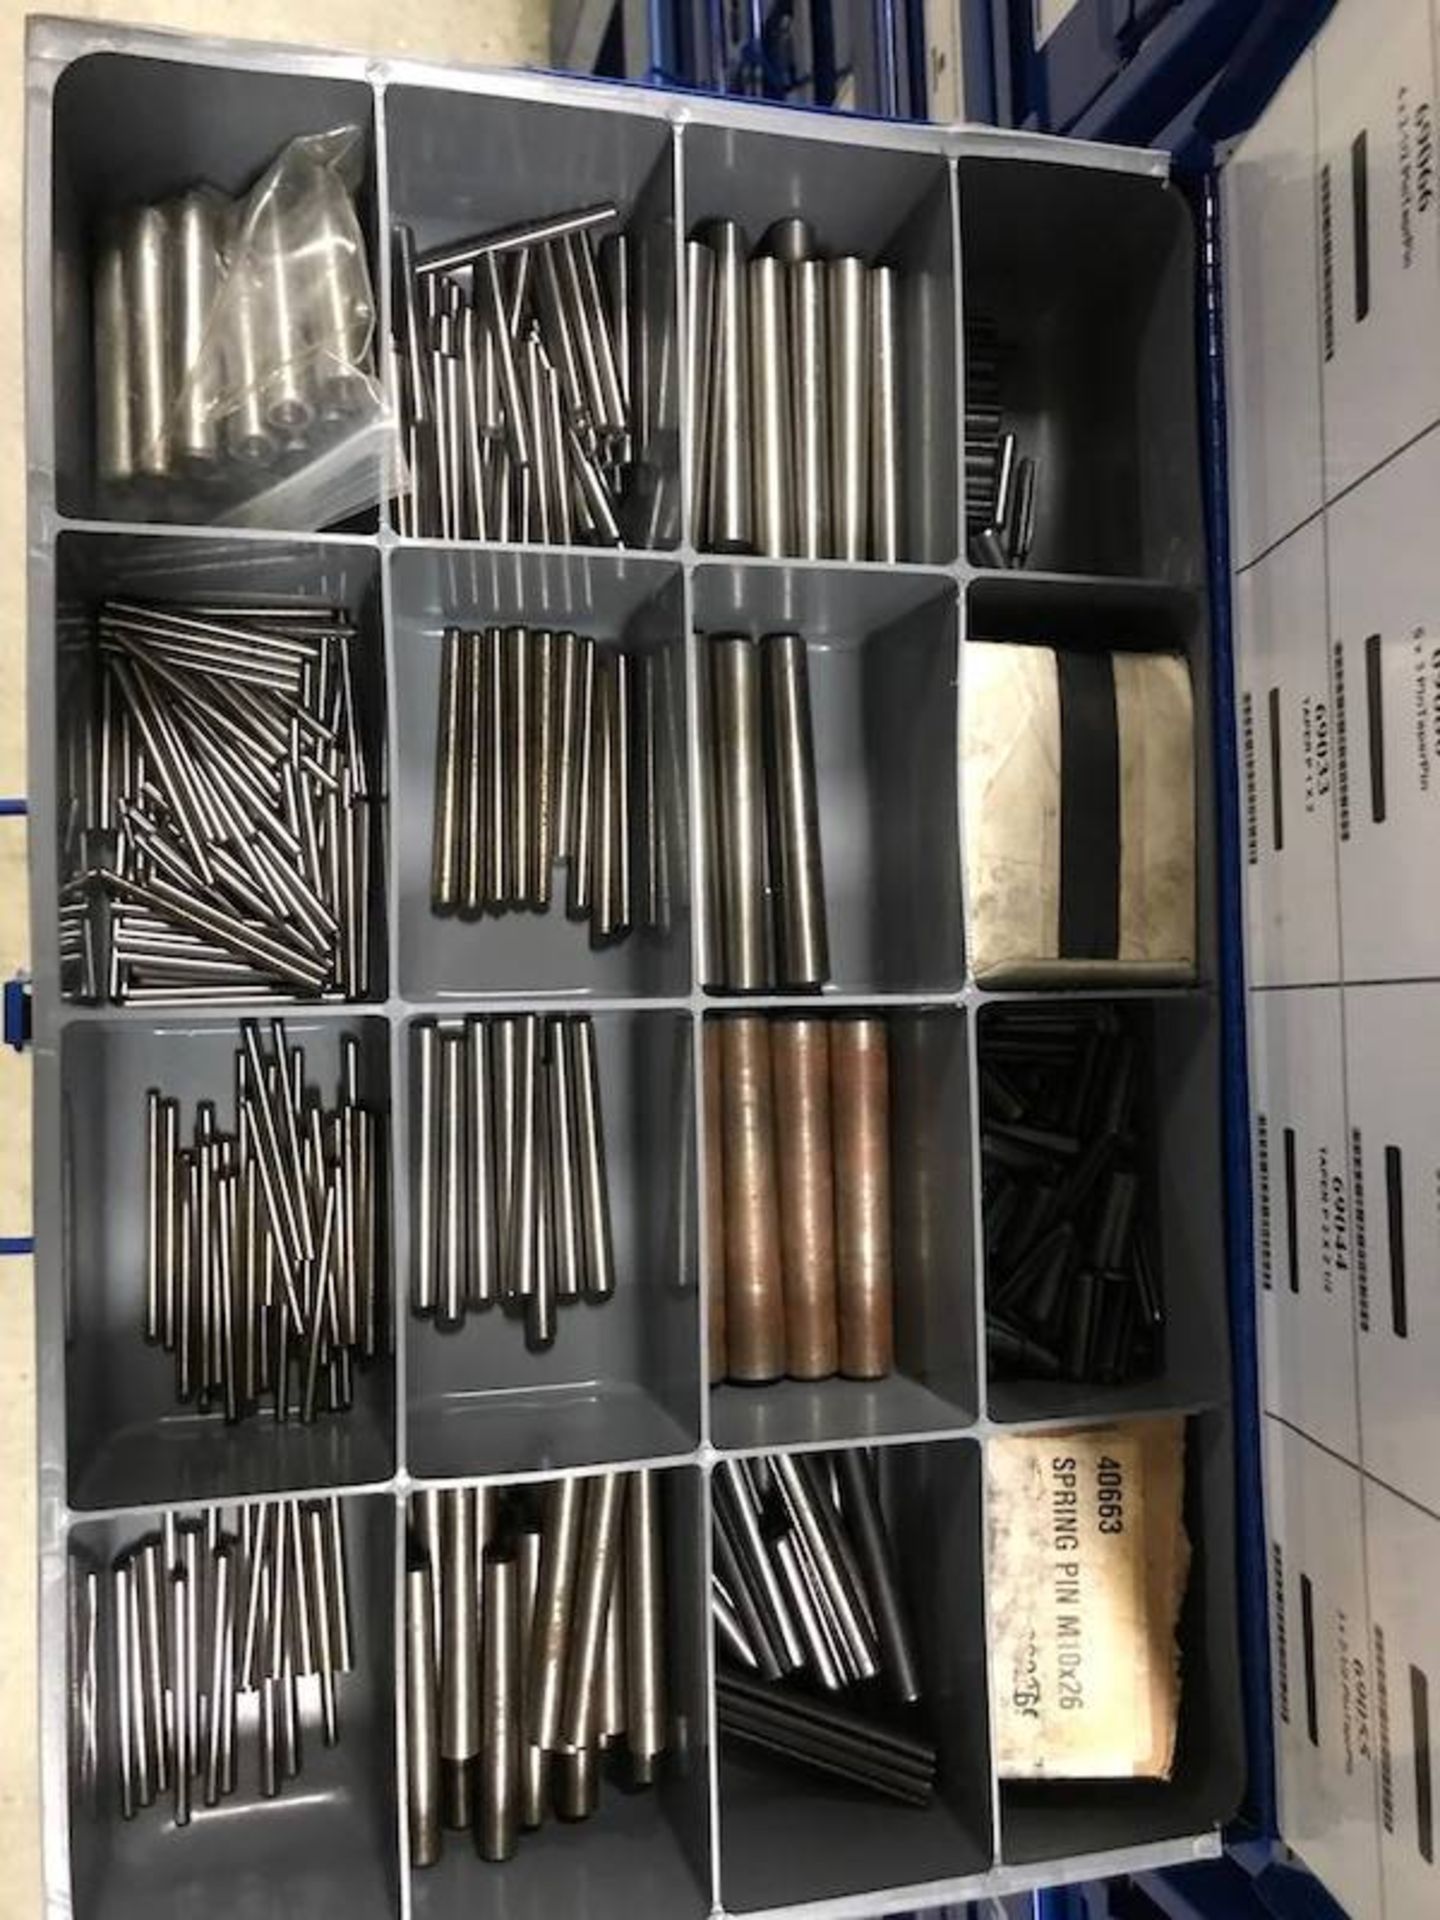 Contents of Fastenal Parts Bins - Image 43 of 70